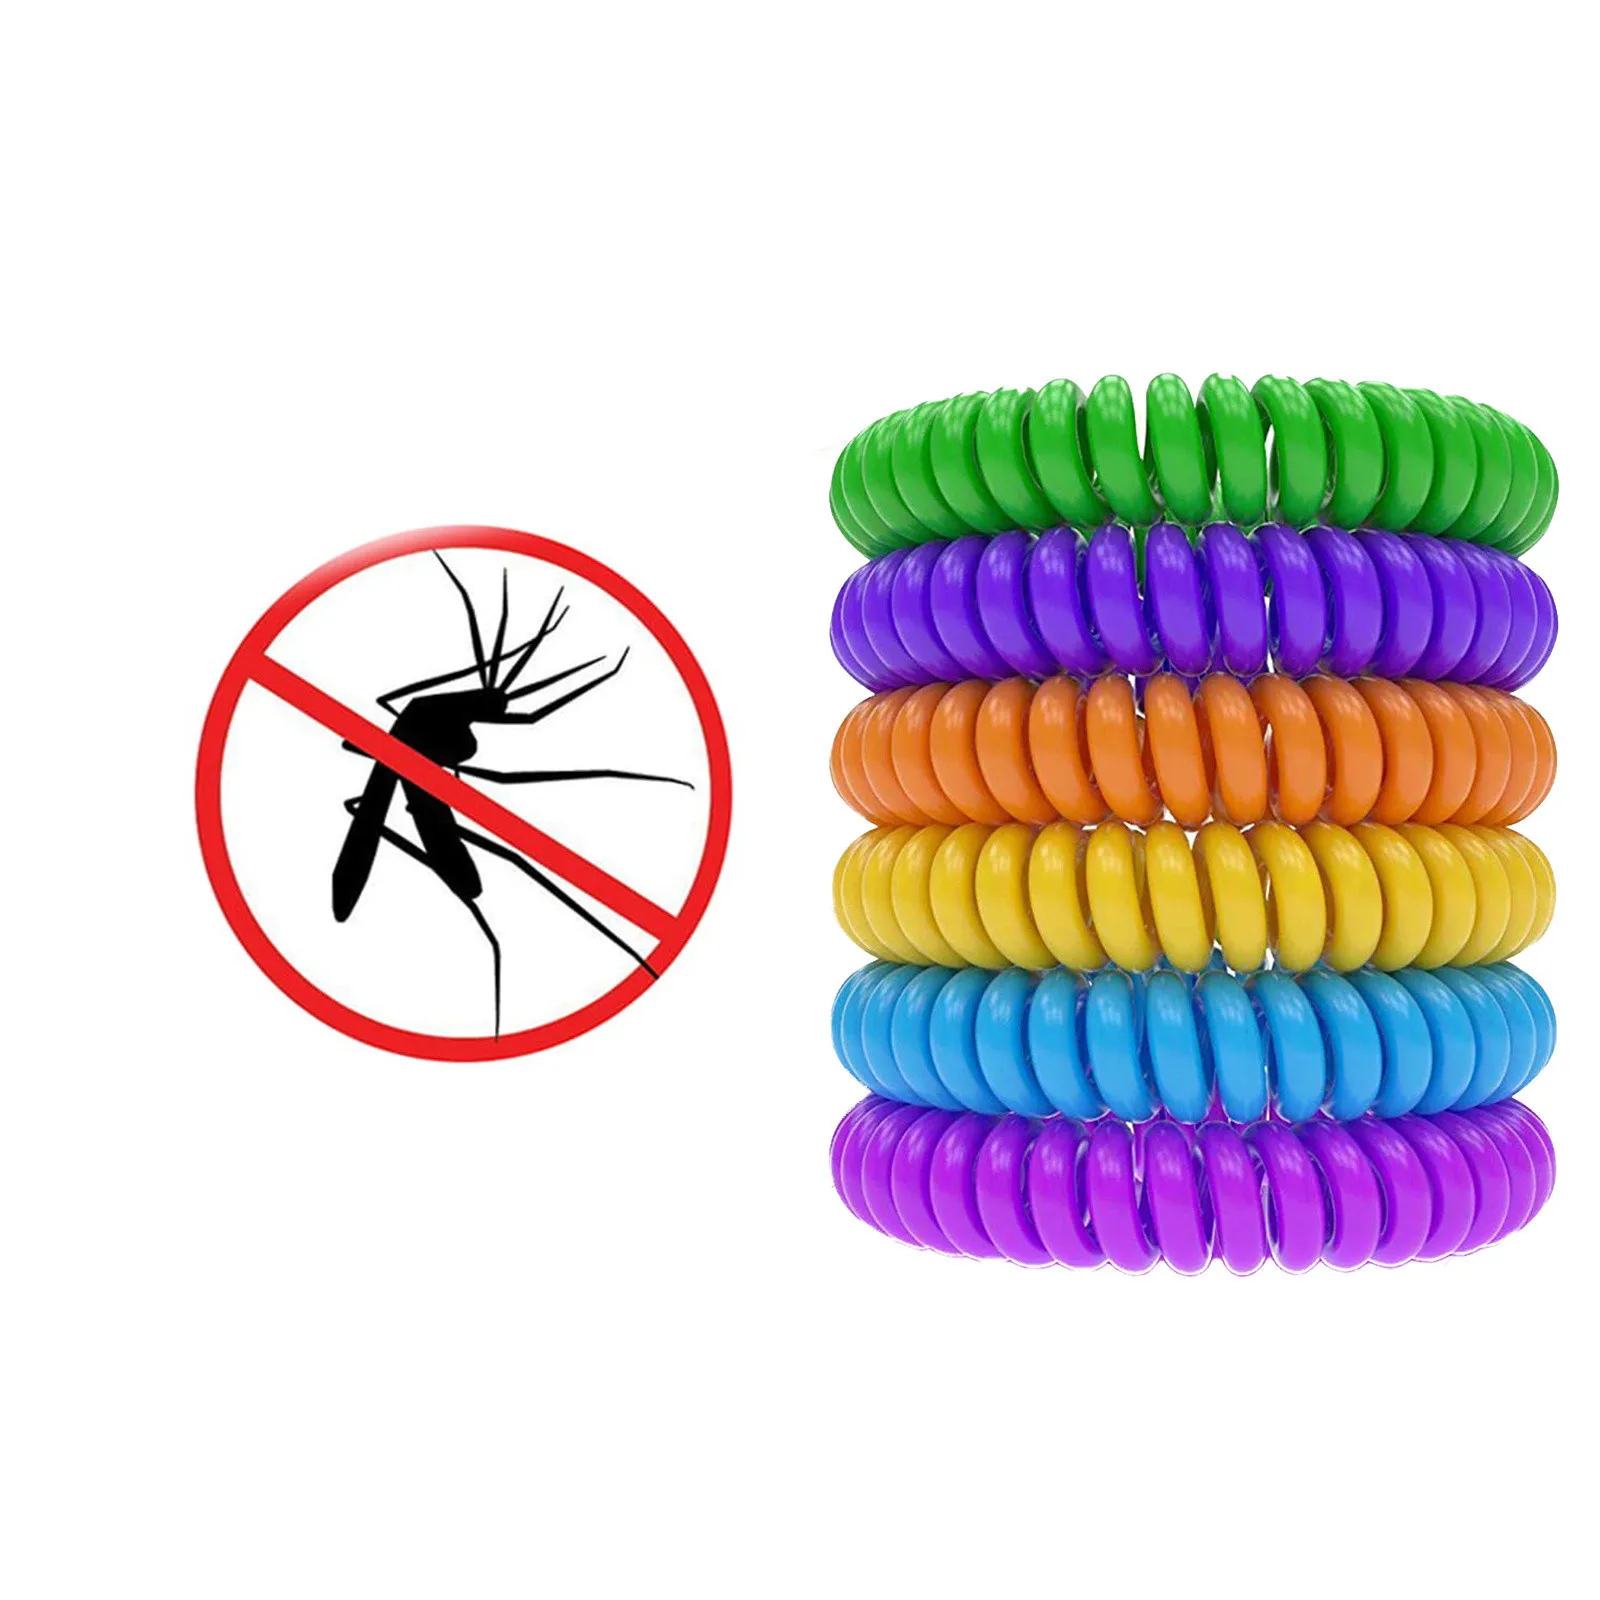 25 Pack Natural Mosquito Insect Bracelets Outdoor Indoor Control Wristbands For Babies Toddler Kids